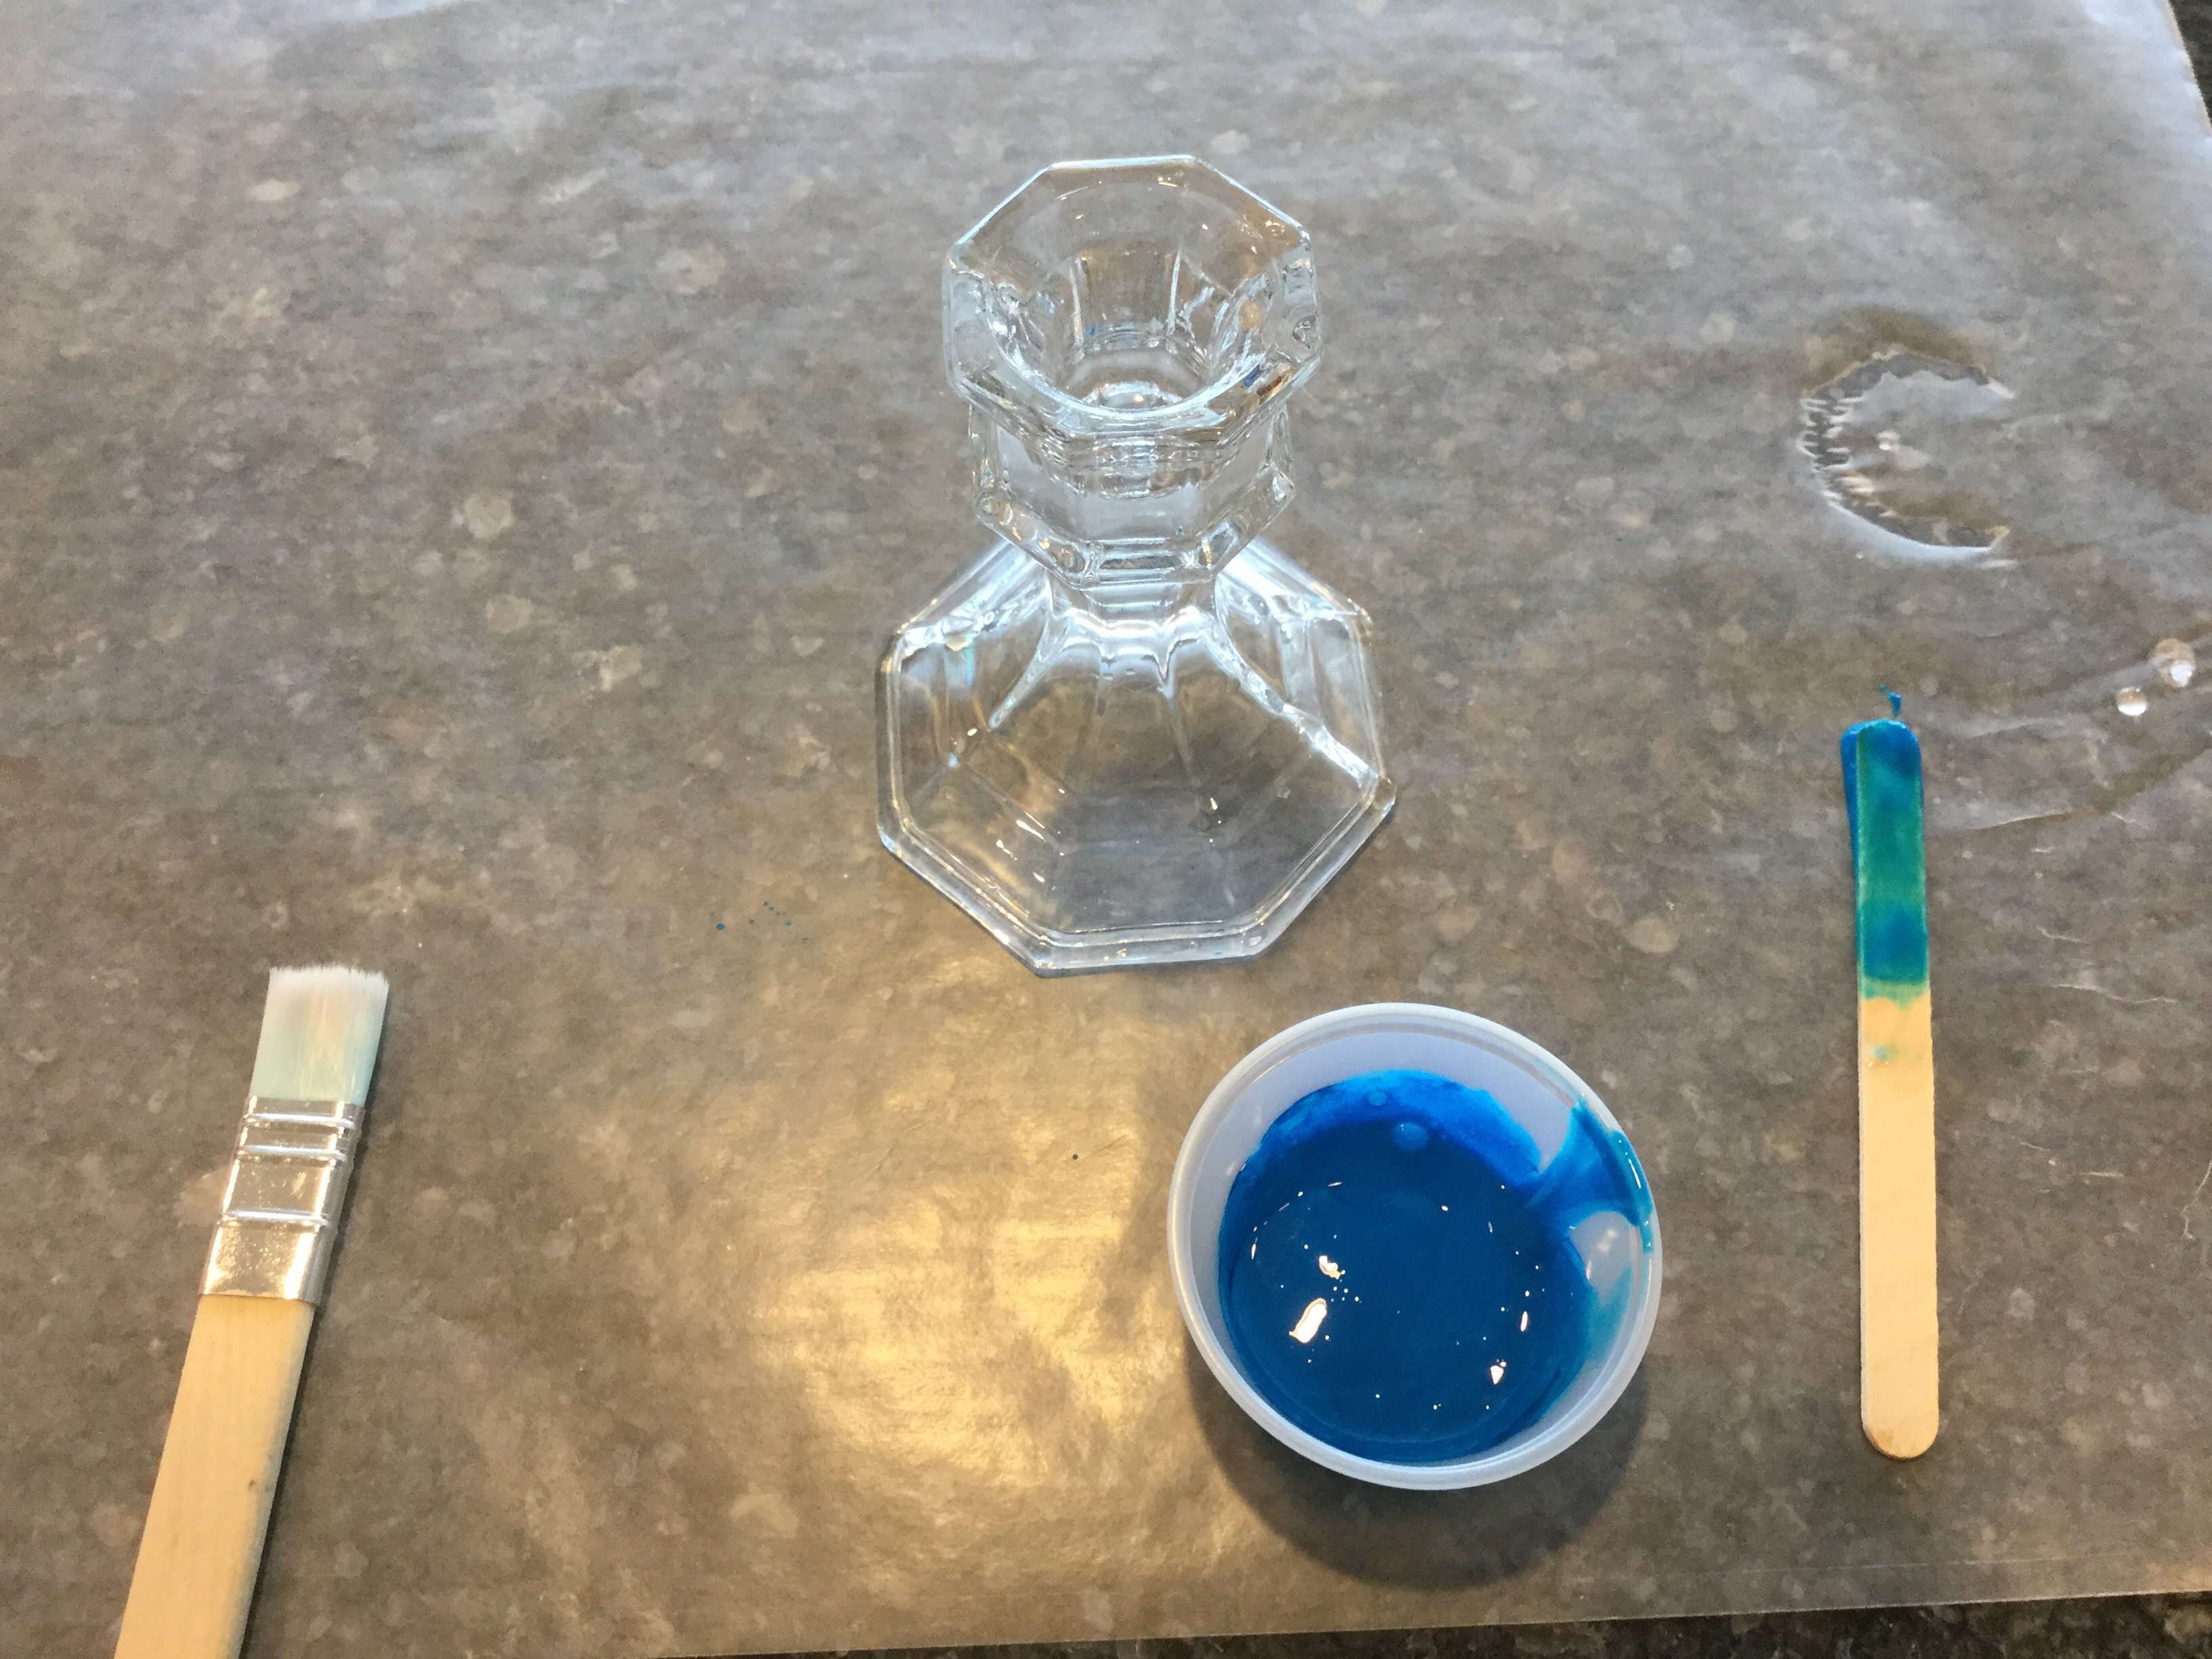 Mix the food color and glue together. If you find this mixture is too thick you can add a little bit of water to get the consistency you like best.